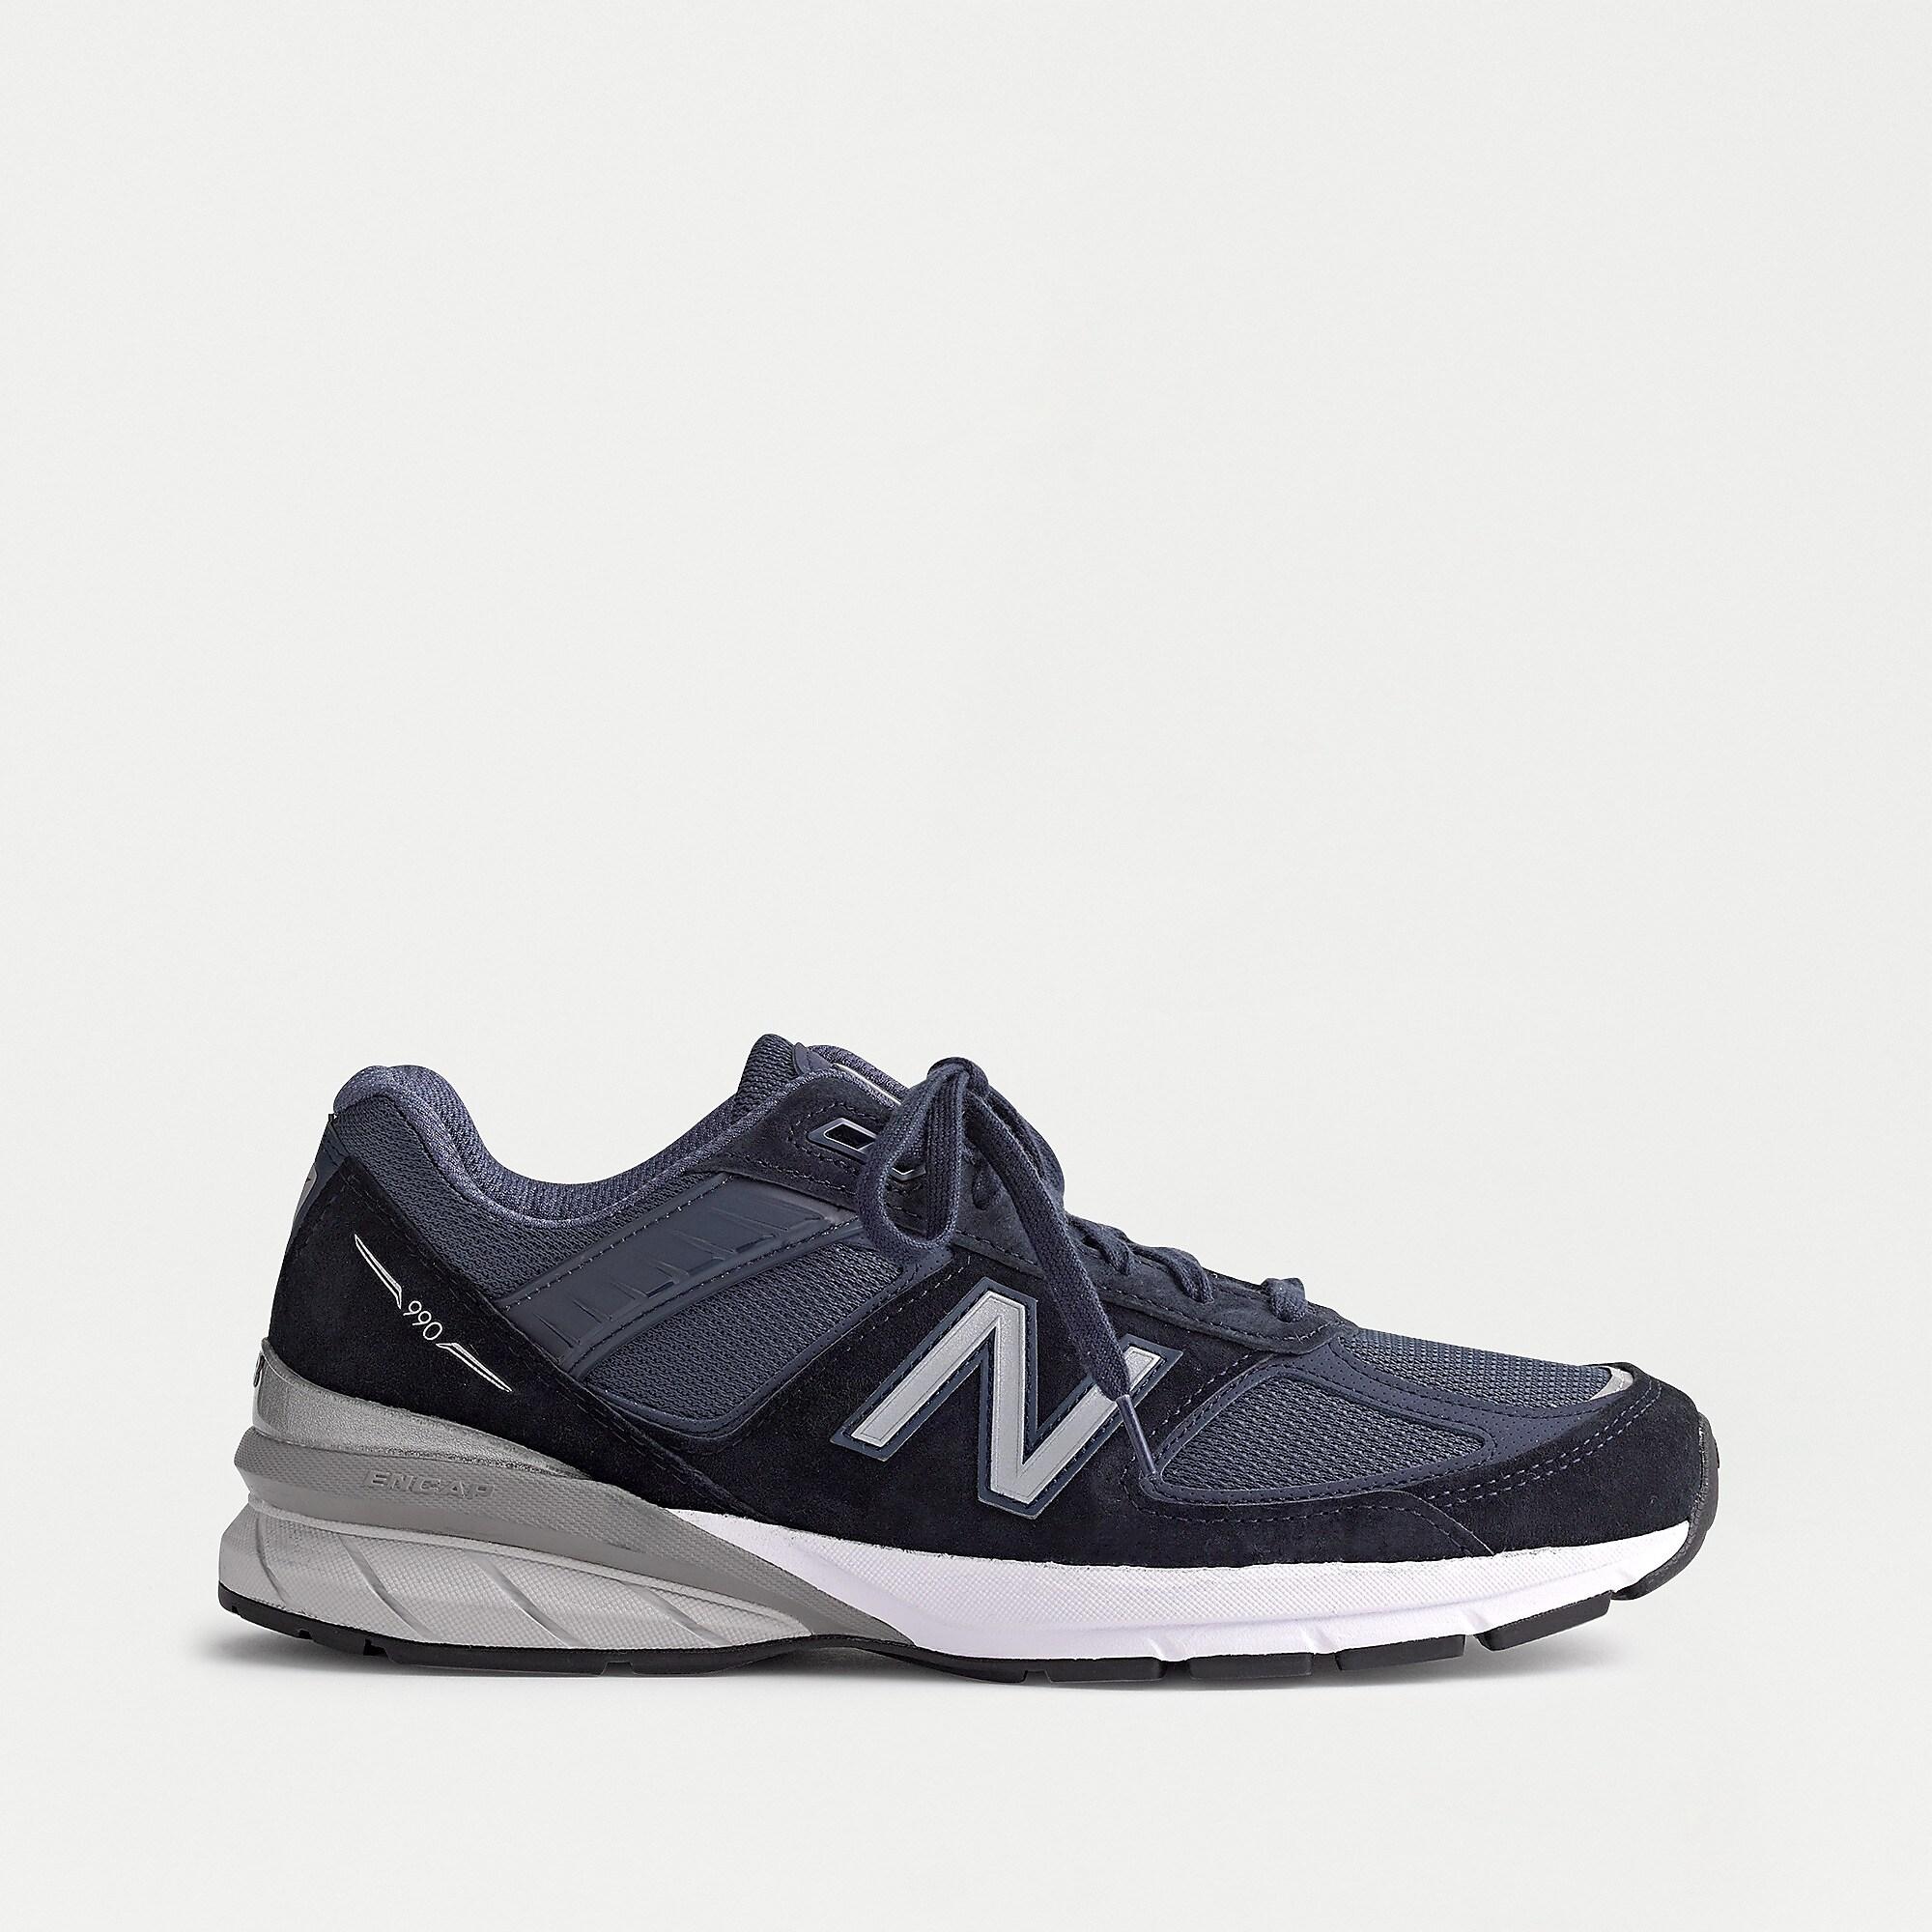 New Balance Suede 990v5 Sneakers in Navy Silver (Blue) for Men - Lyst